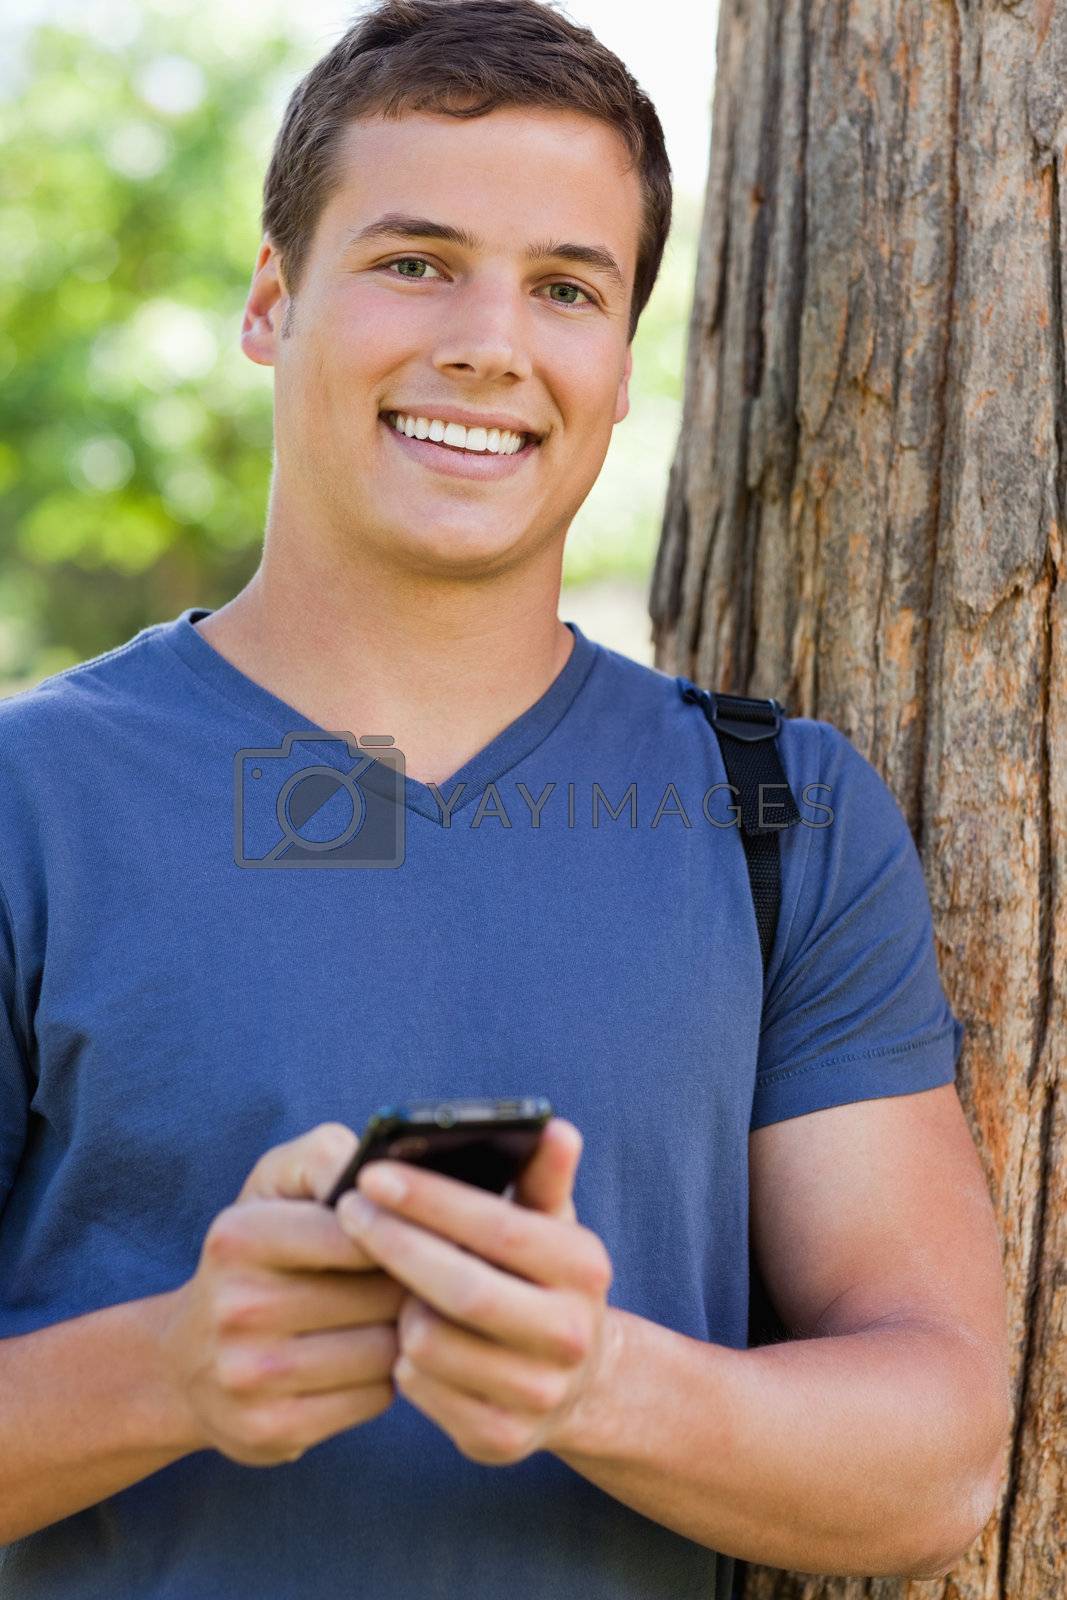 Royalty free image of Portrait of a muscled student with a smartphone by Wavebreakmedia